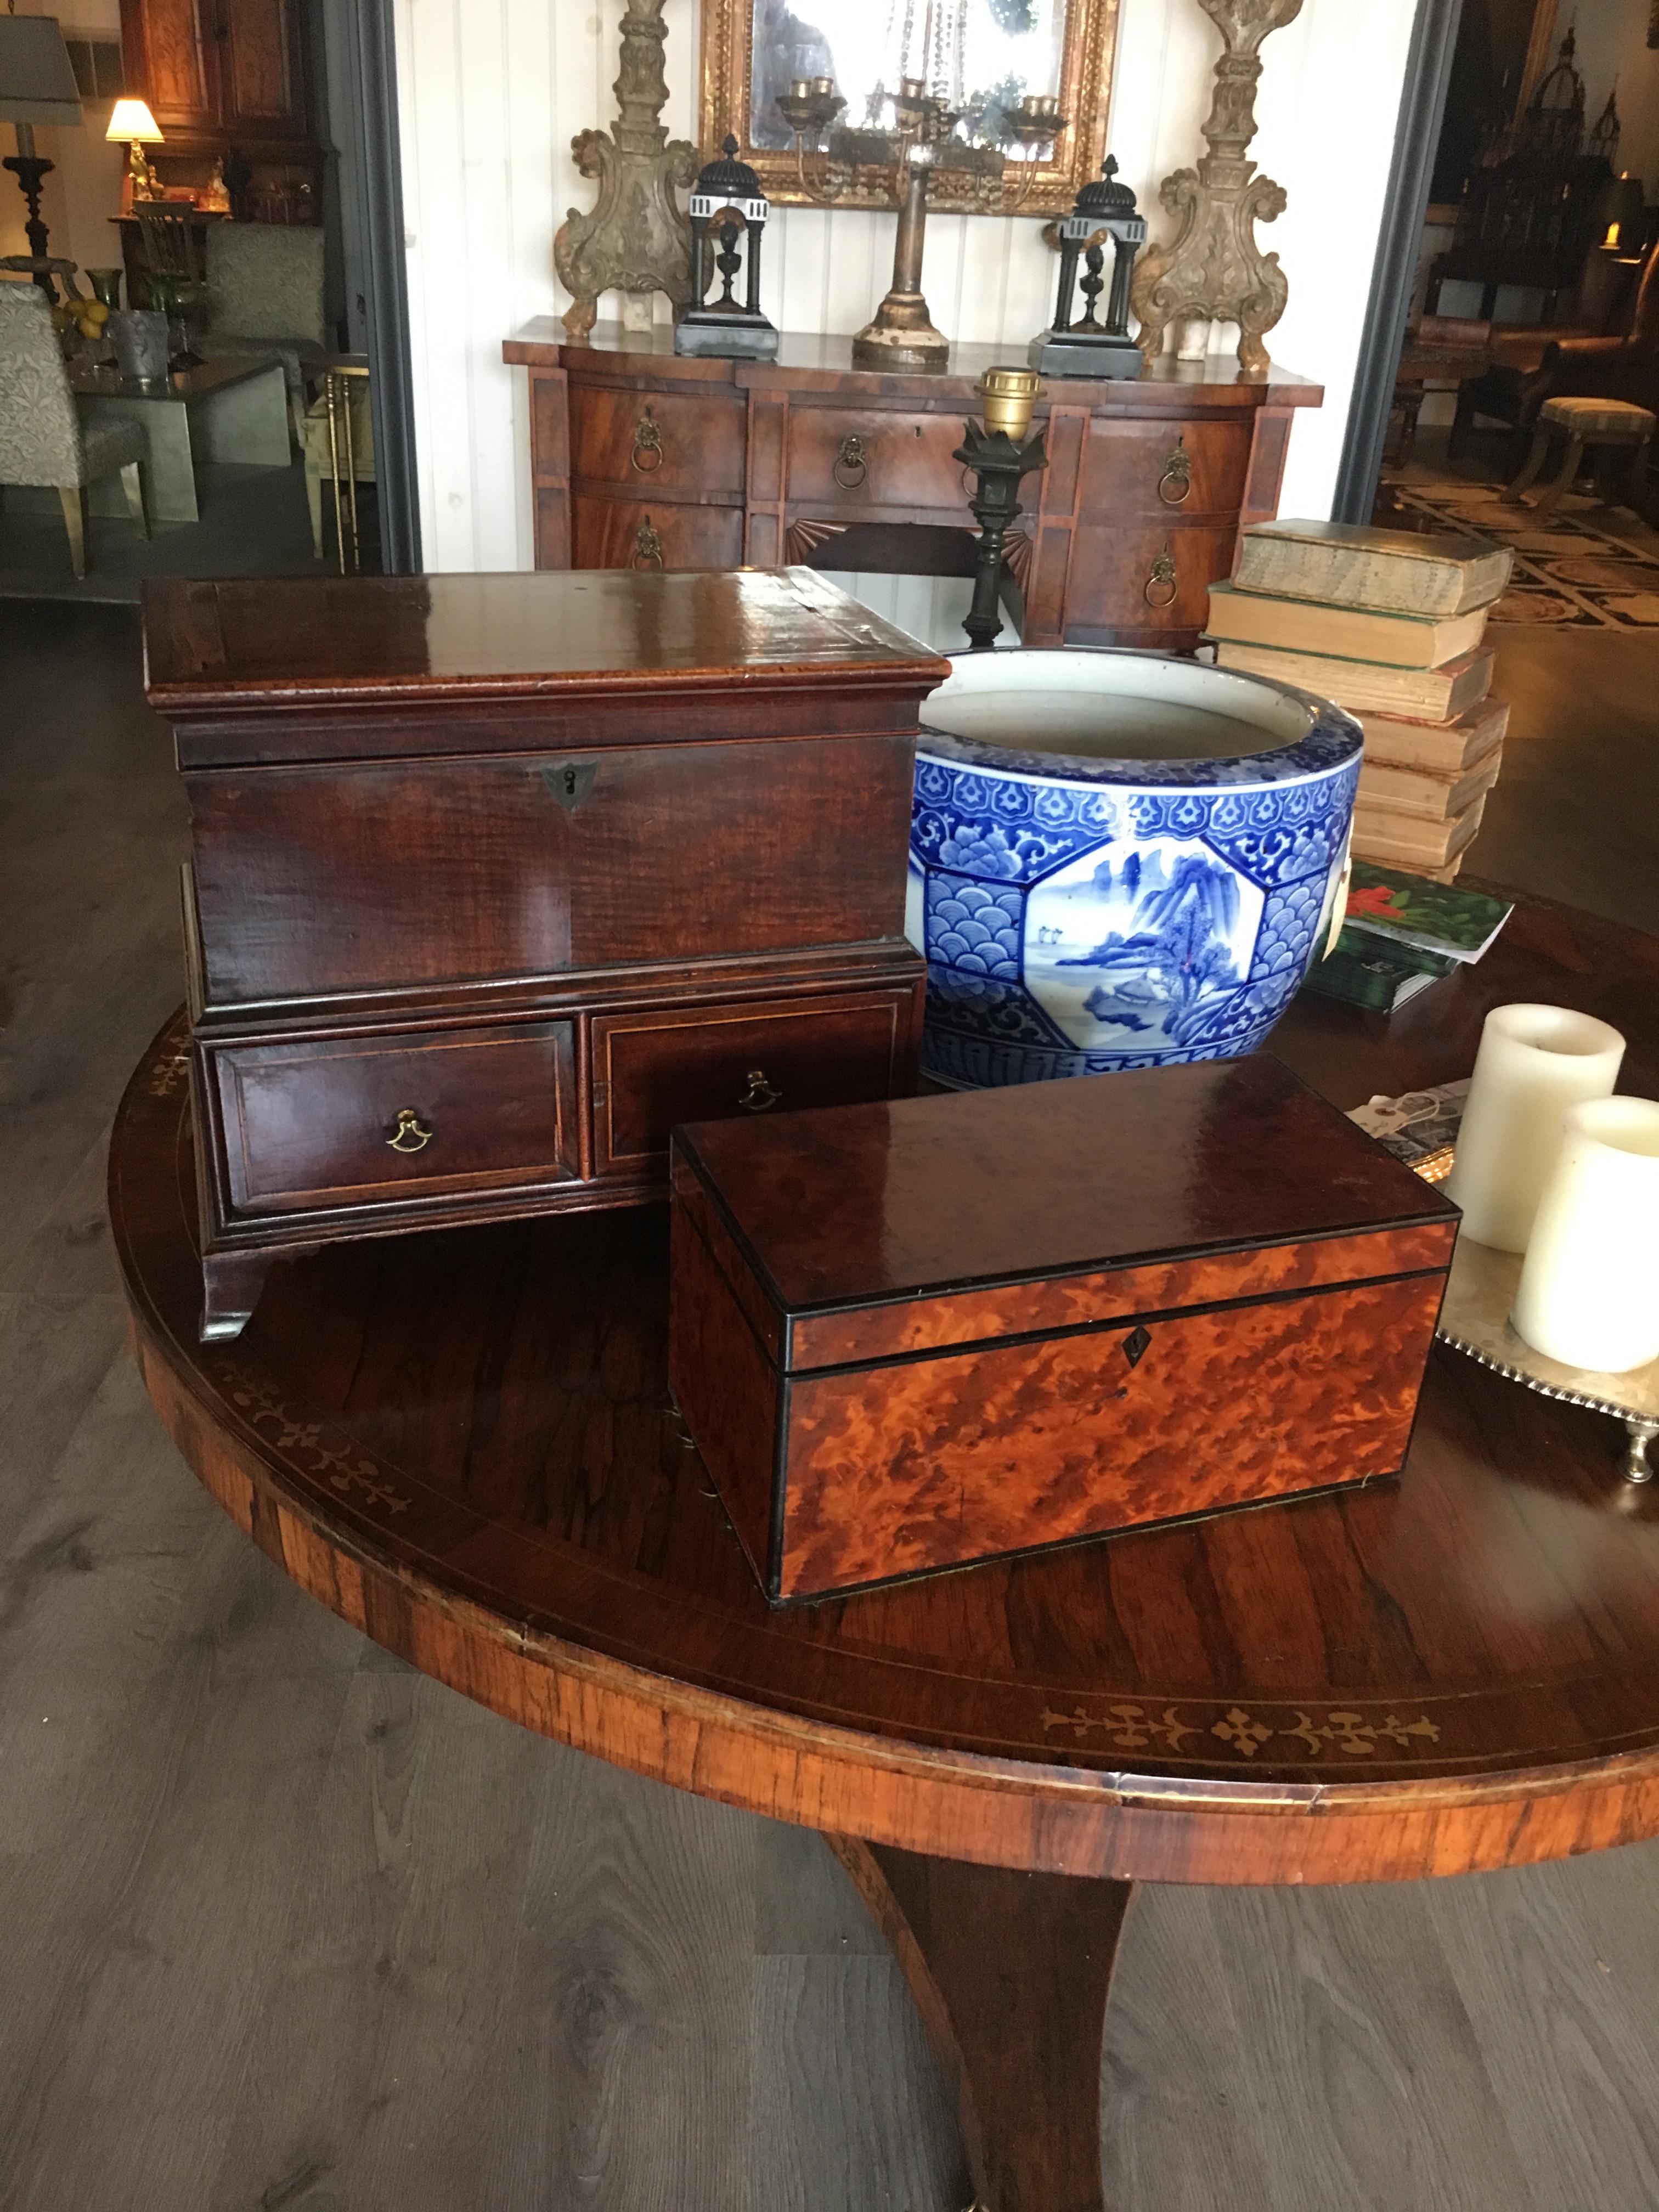 18th century English diminutive mahogany chest with satin wood banding. Top opens to an compartment over two drawers. Great color and patina. Can be used as a tabletop decoration or small side table.